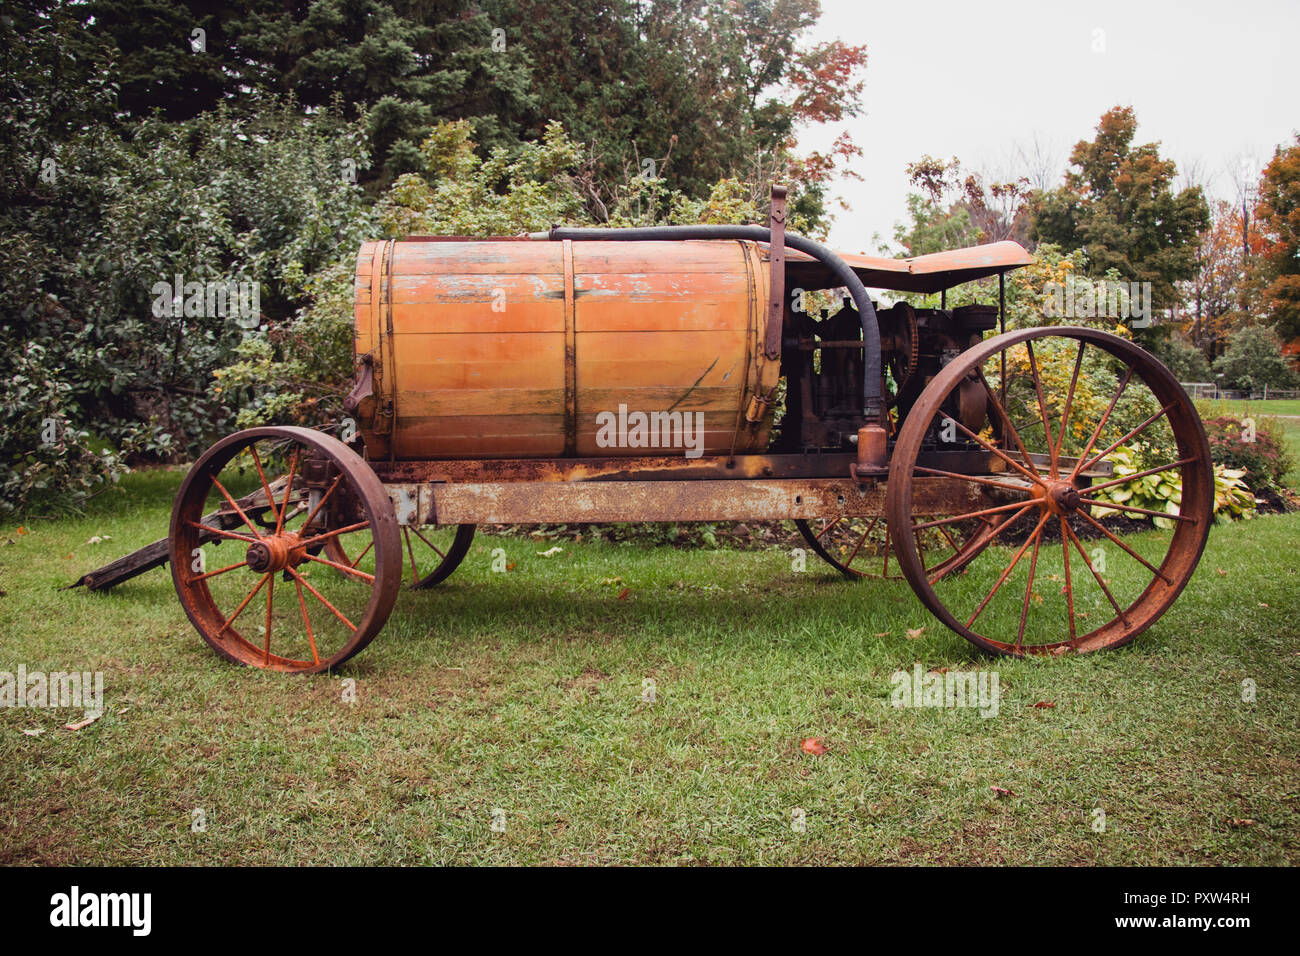 Orchard equipment - Antique carriage with sprayer pump Stock Photo